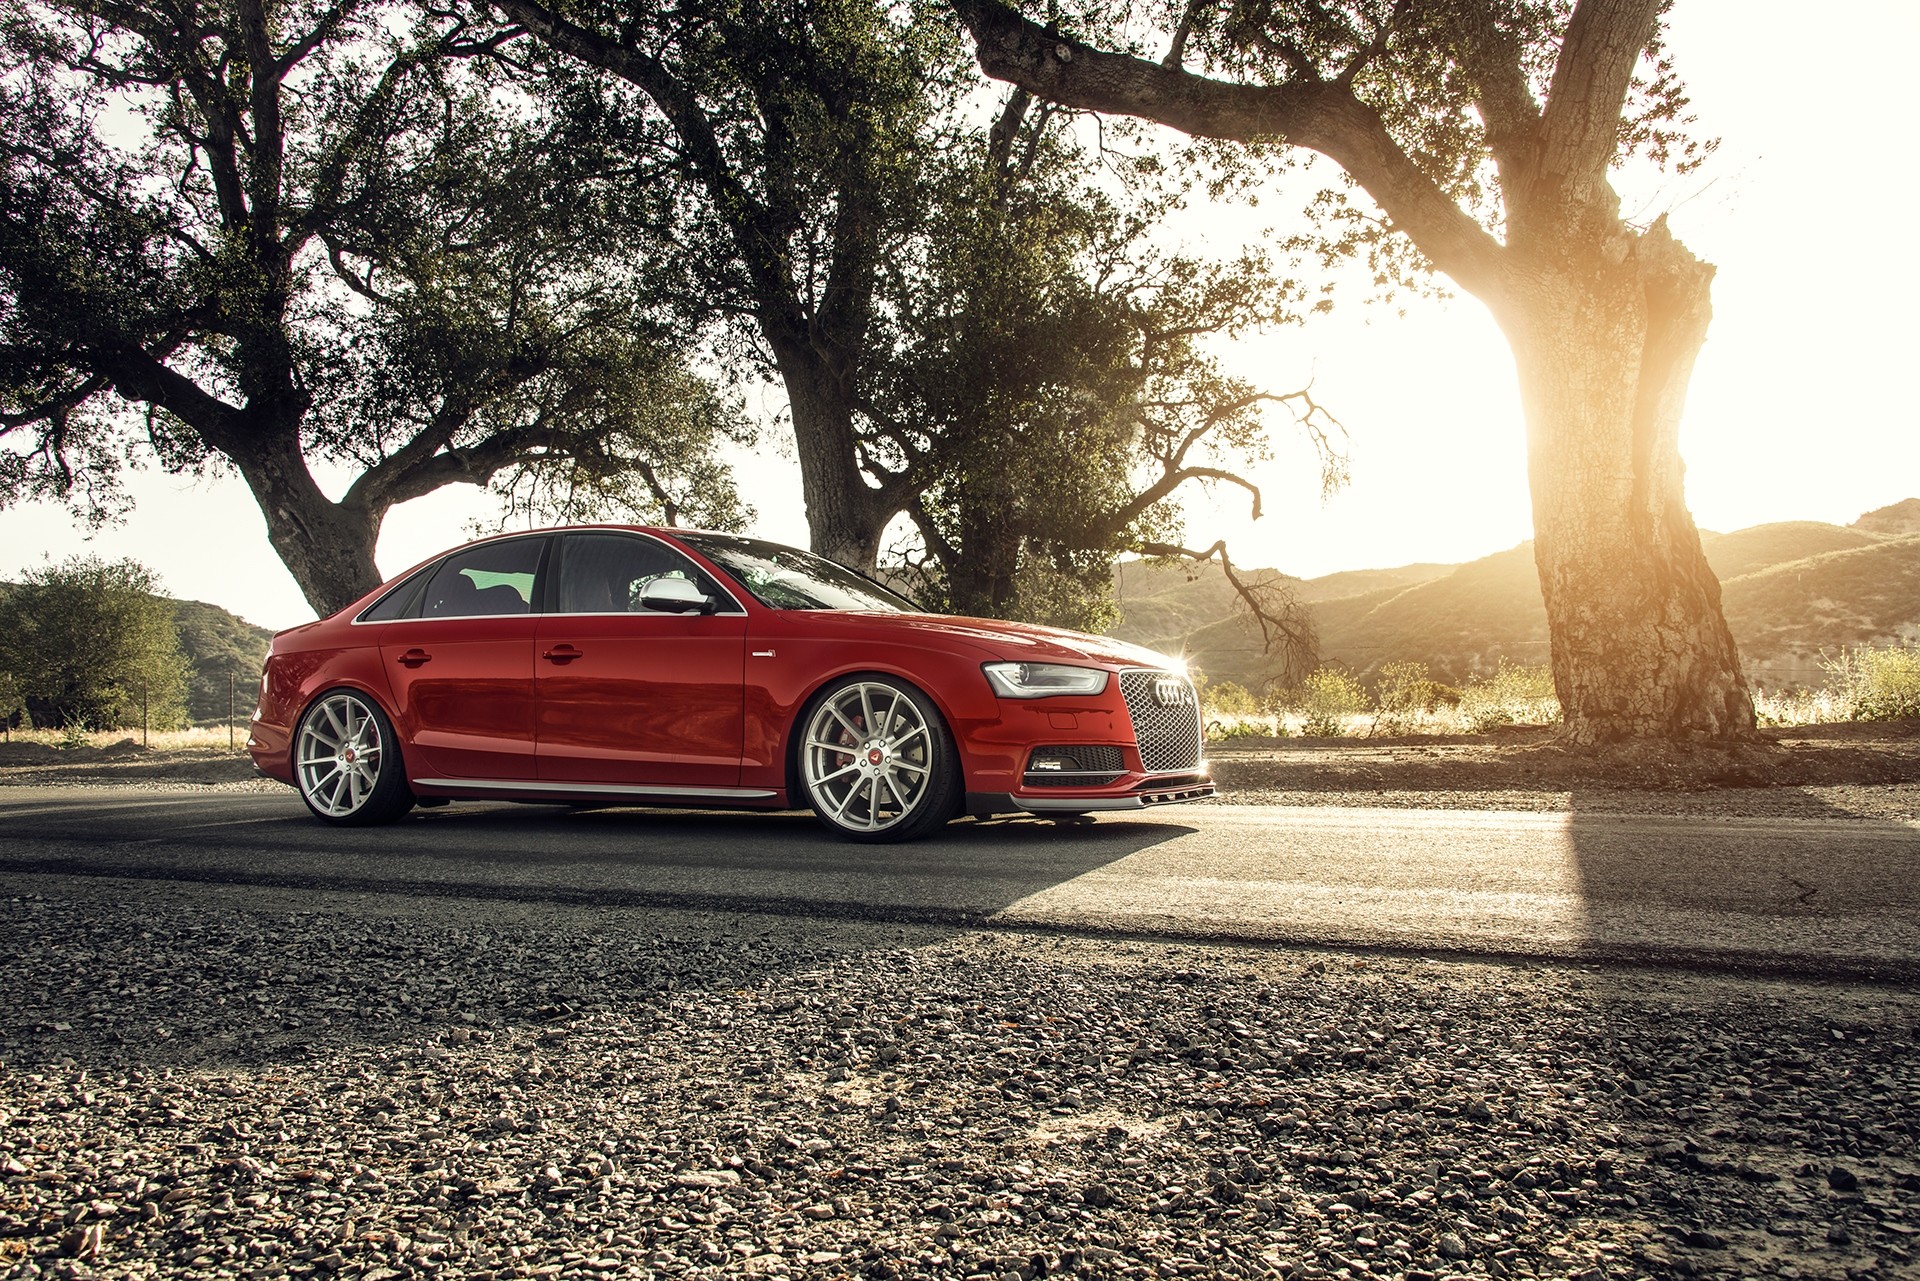 1920x1281 Audi S4 Wallpapers HD Computer Audi S4 Wallpapers HD Free Download